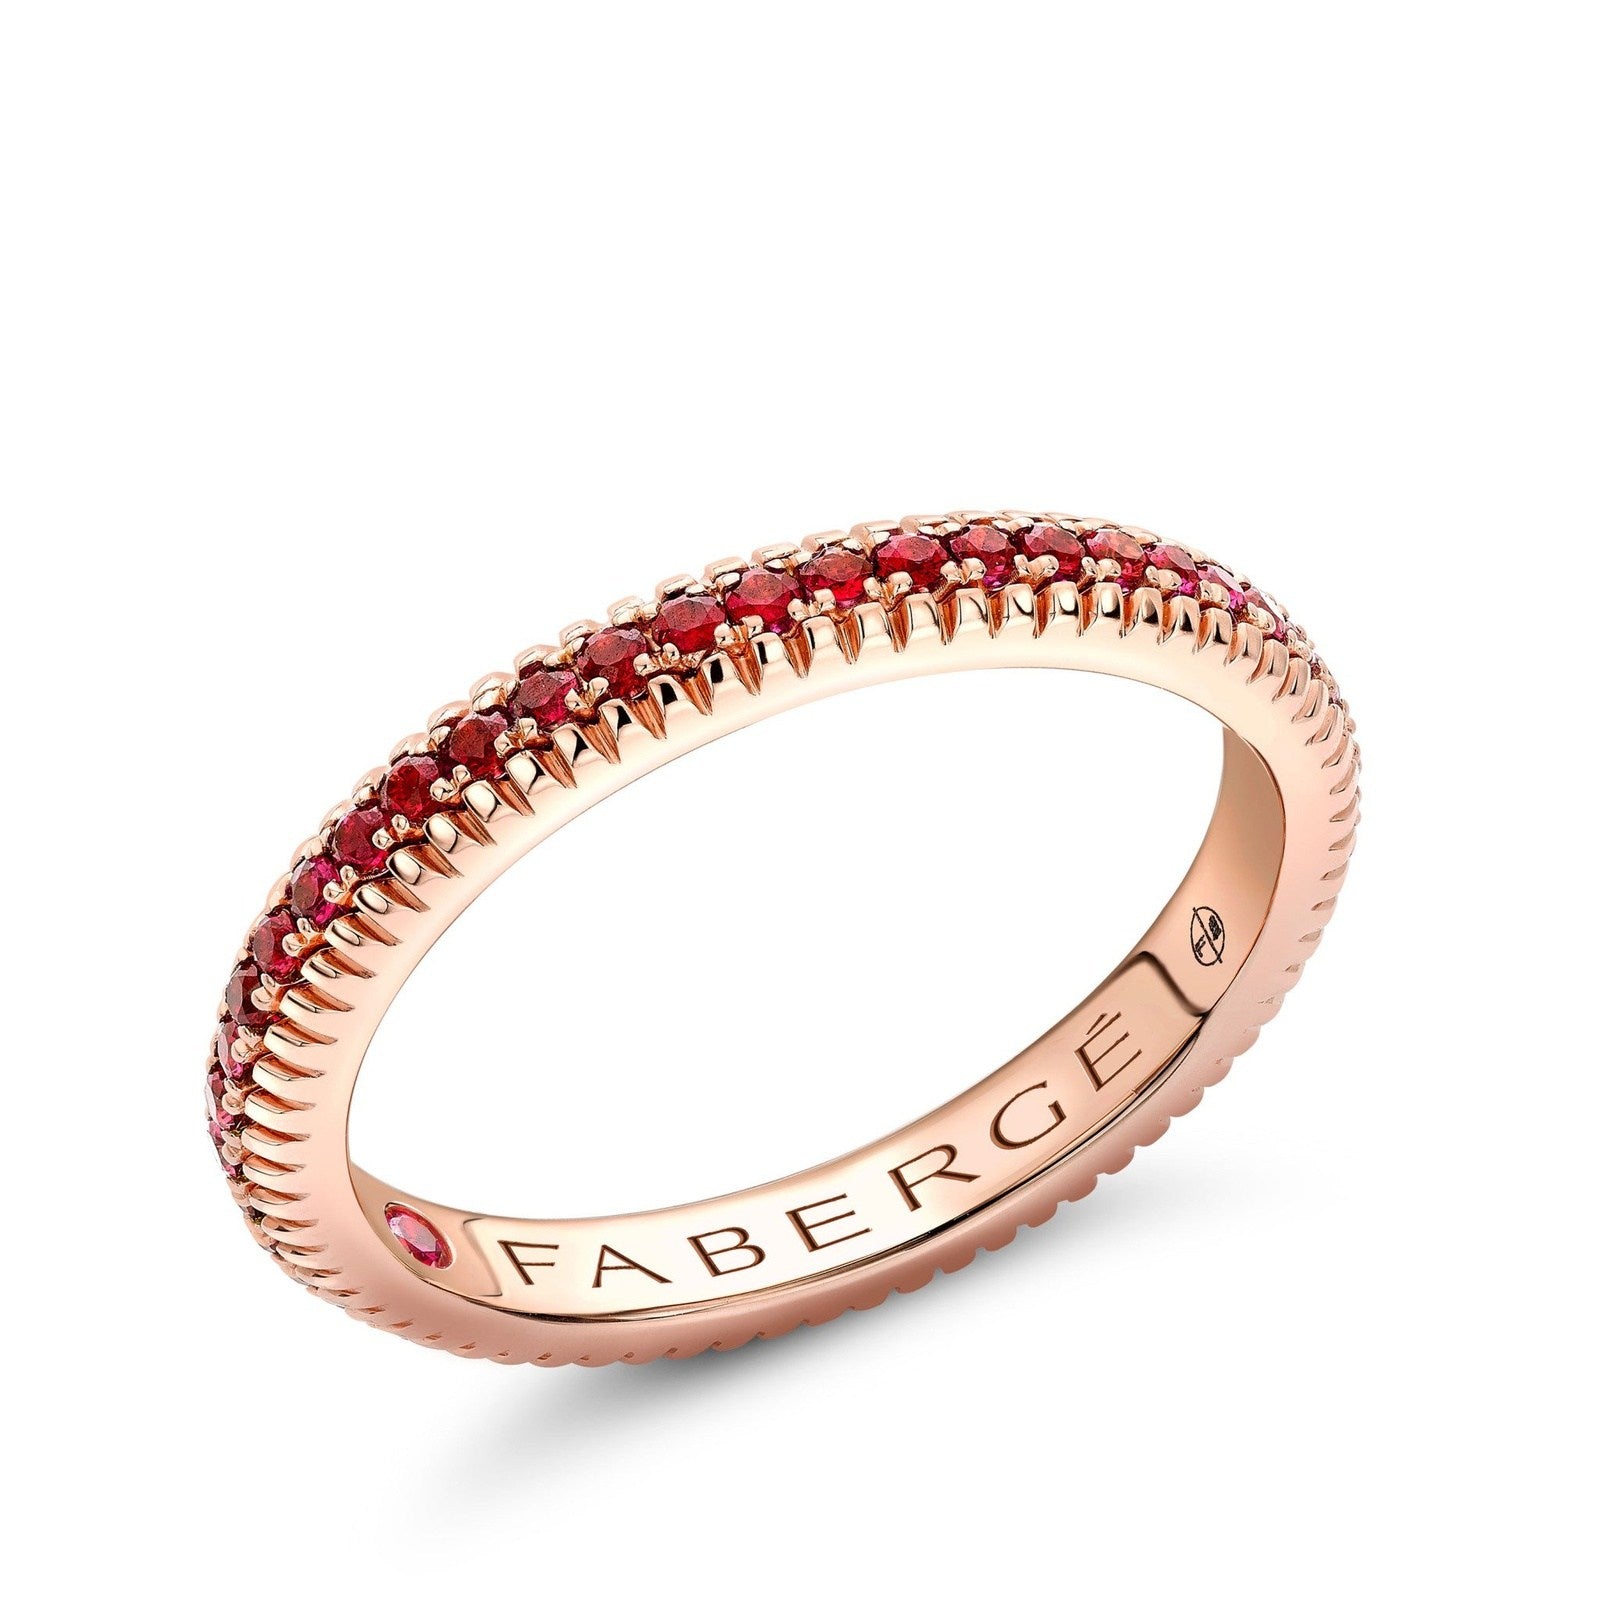 Faberge Colours of Love Rose Gold Ruby Set Fluted Ring  - 847RG1753